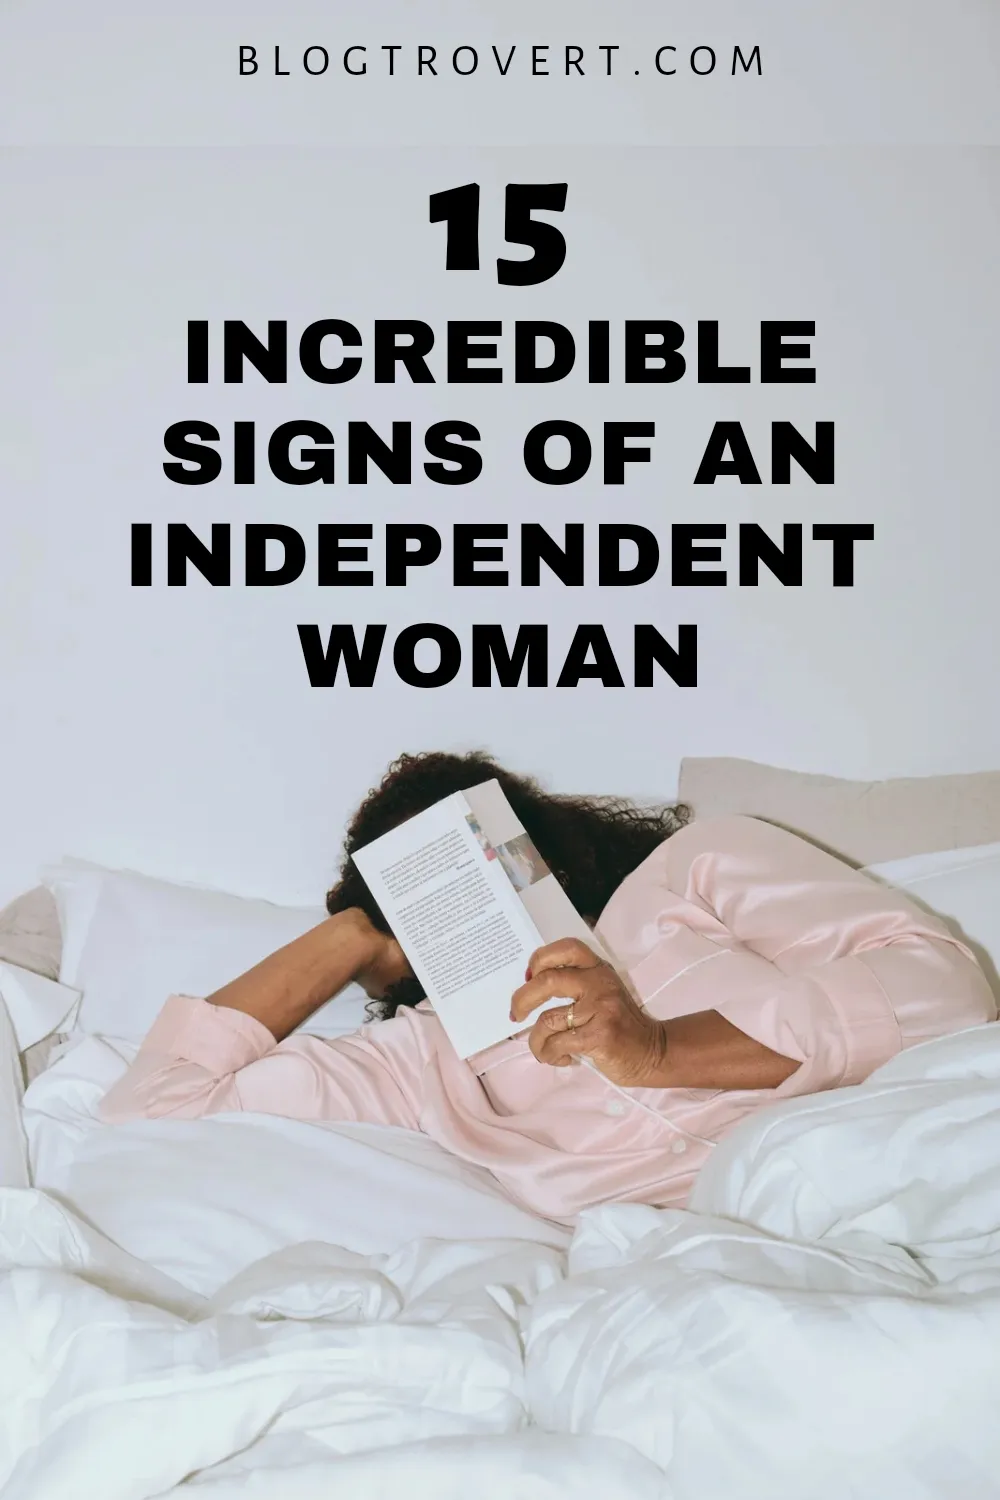 15 characteristics of an independent woman that will inspire you 3